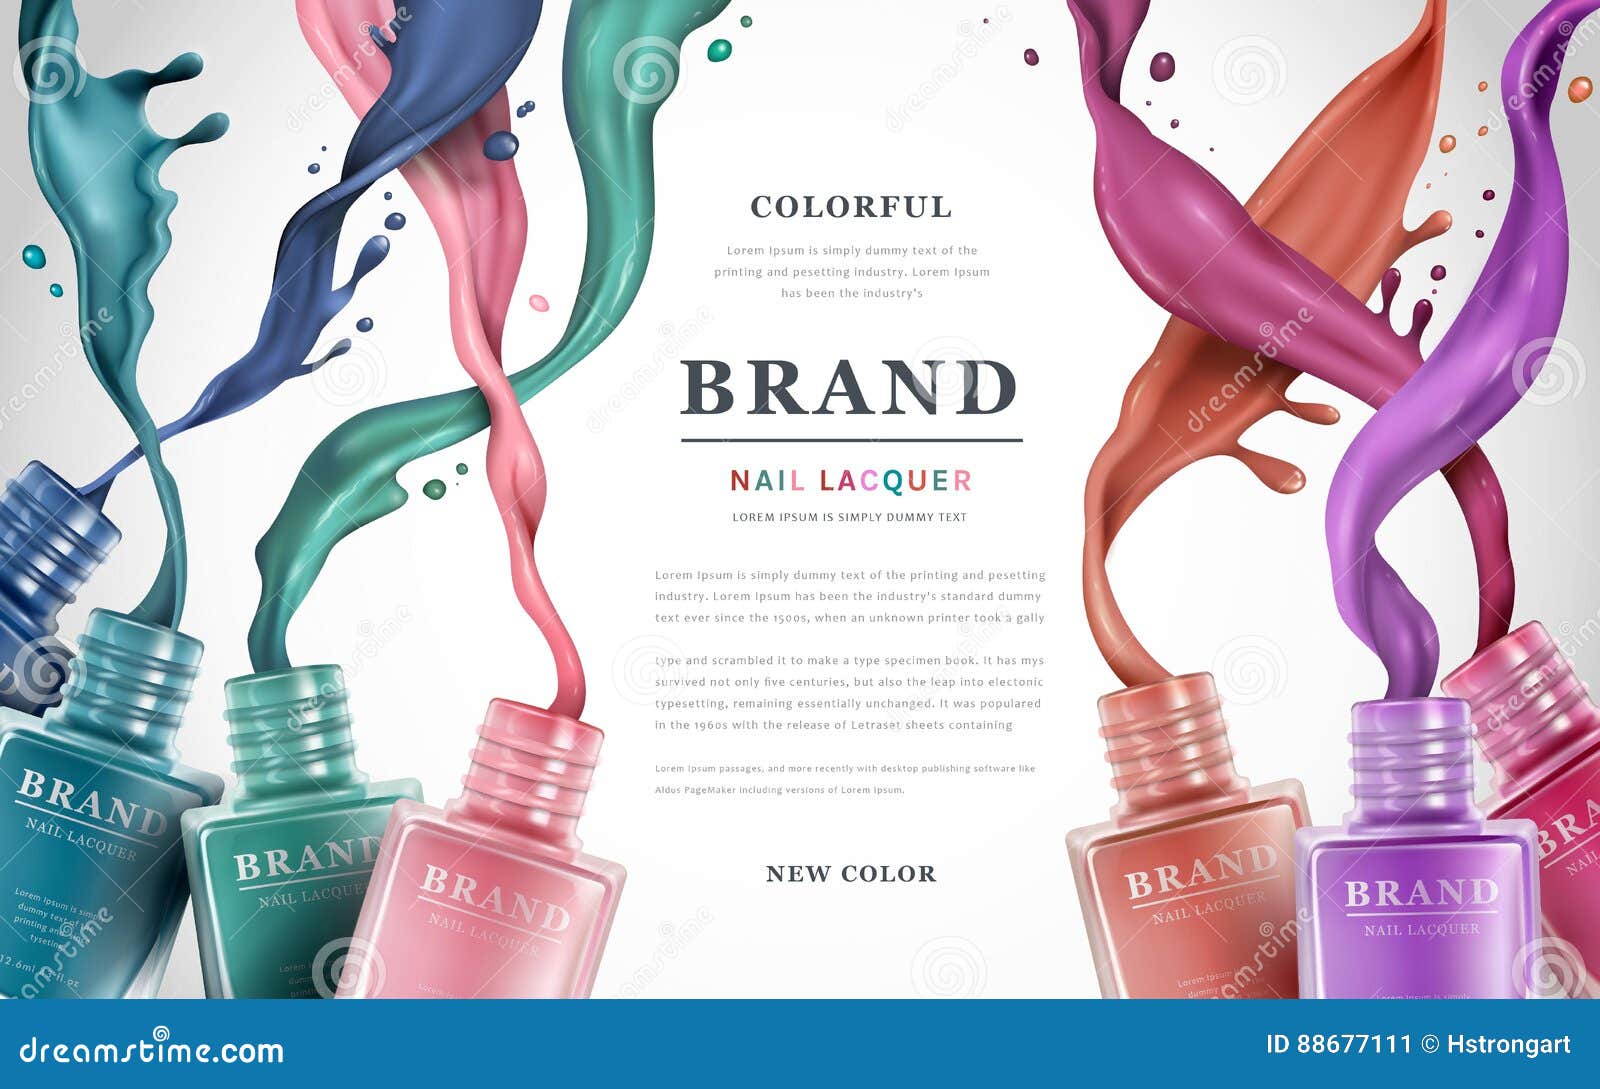 colorful nail lacquer ads